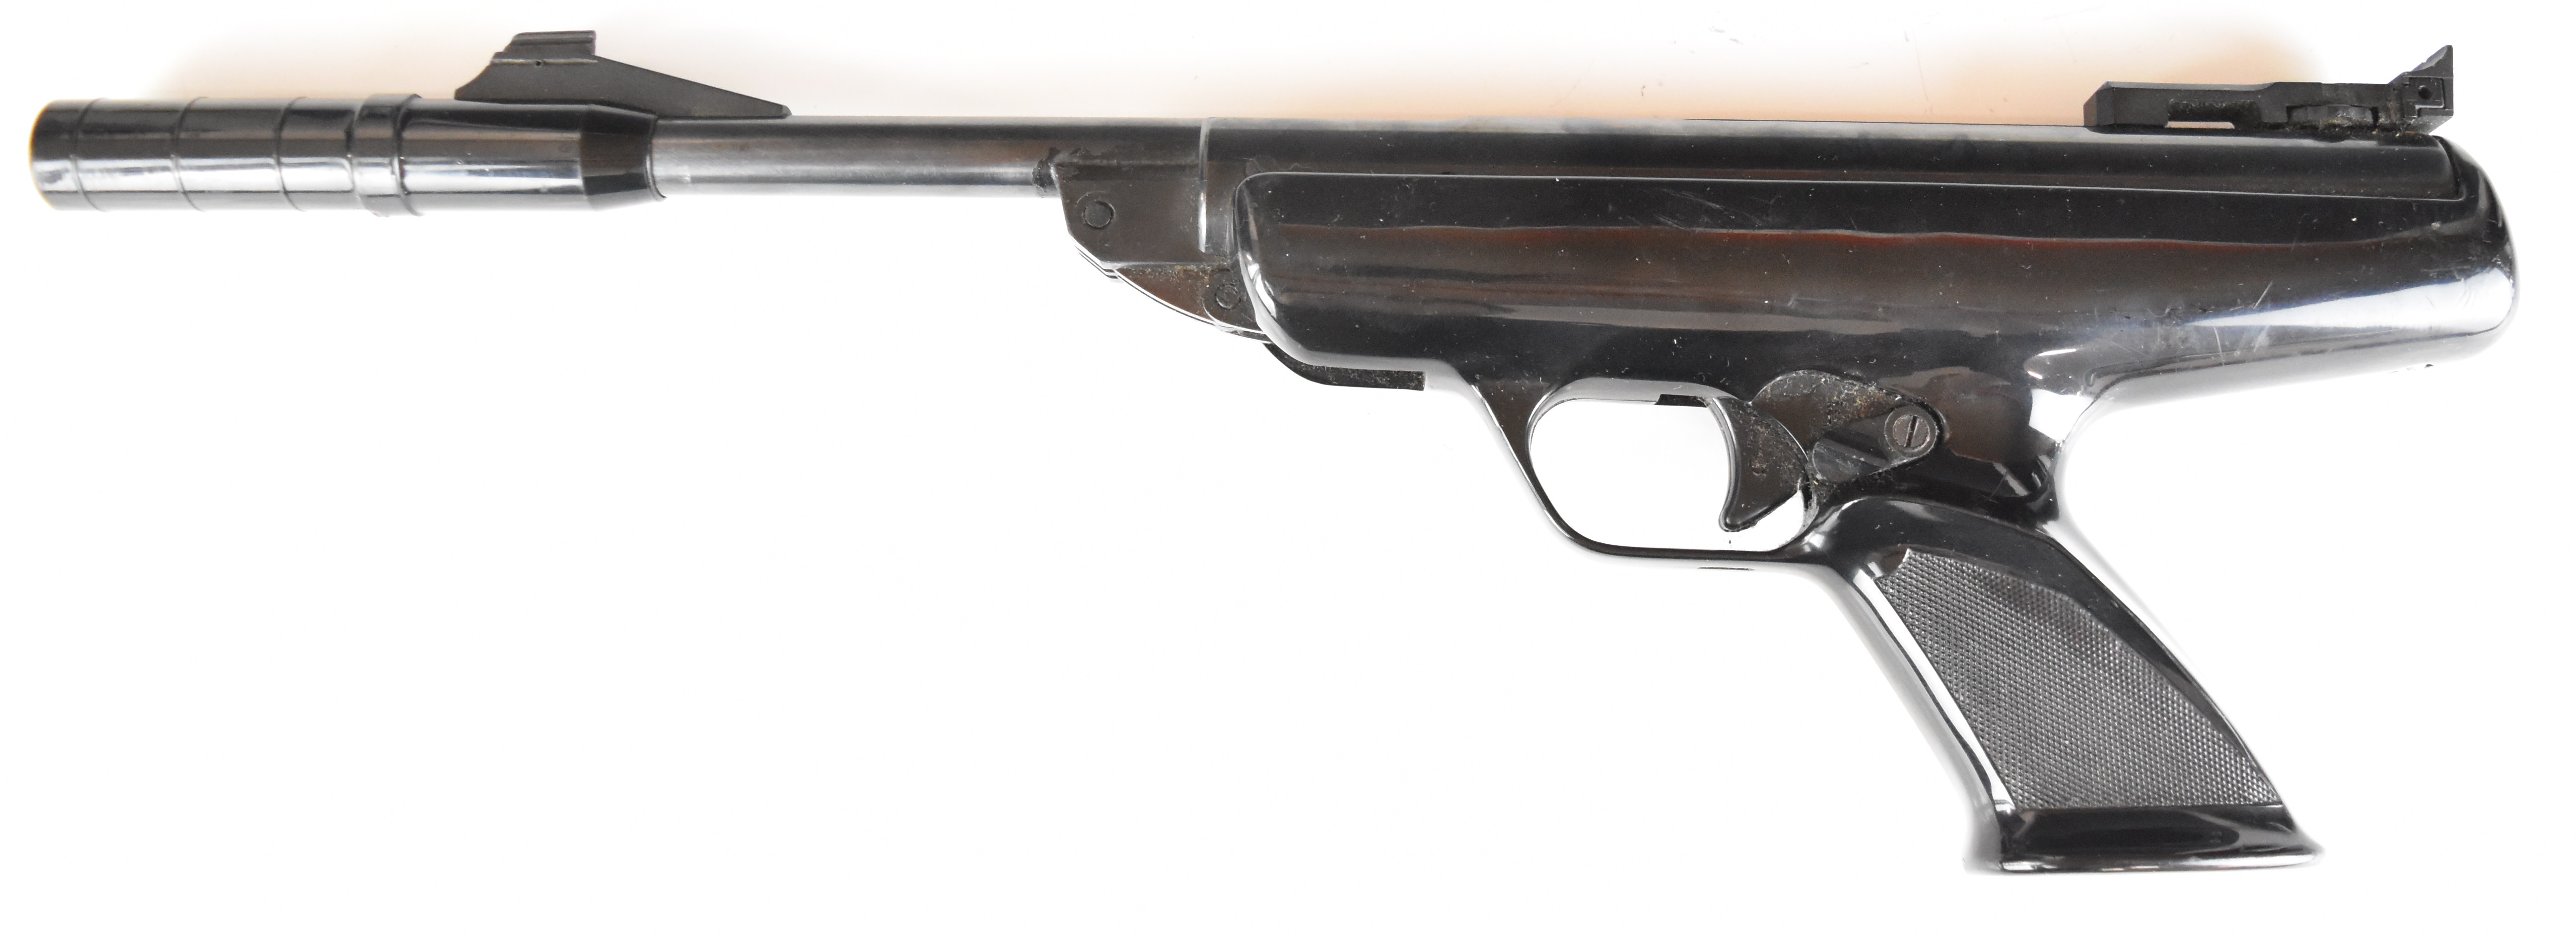 BSA Scorpion .177 target air pistol with shaped and chequered composite grip and adjustable - Image 2 of 12